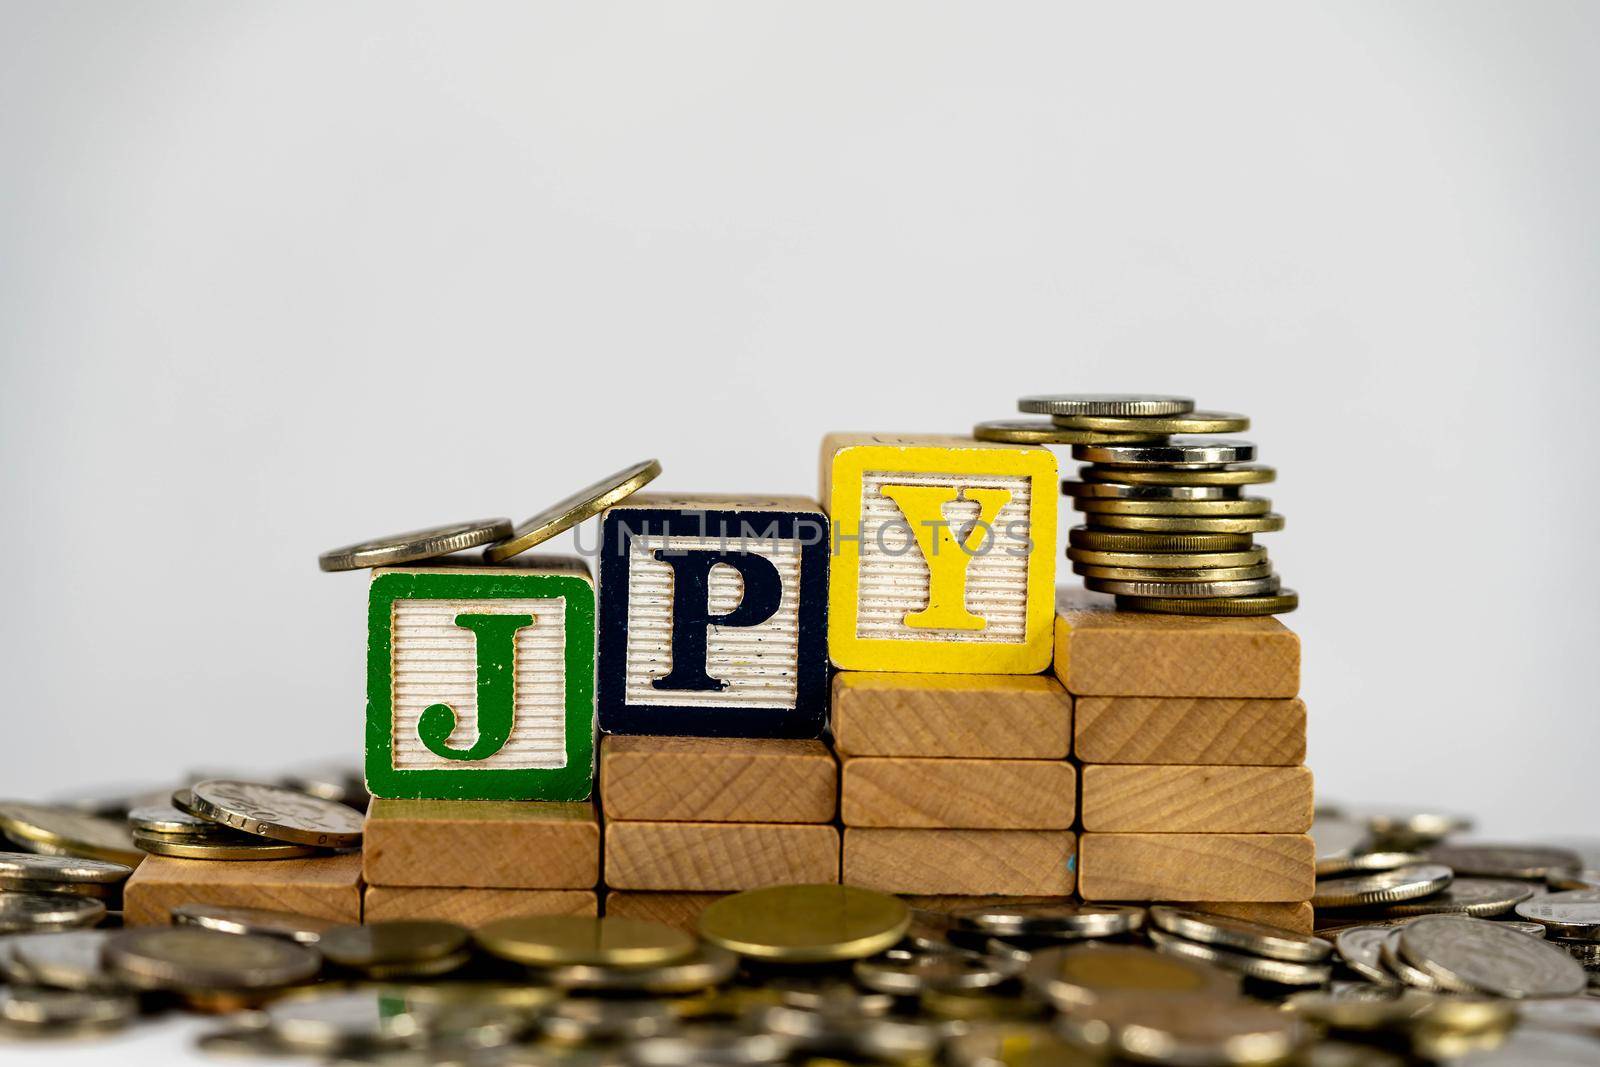 Forex JPY concept with wooden blocks and coins. Forx JPY letters on wooden blocks sorrounded with money